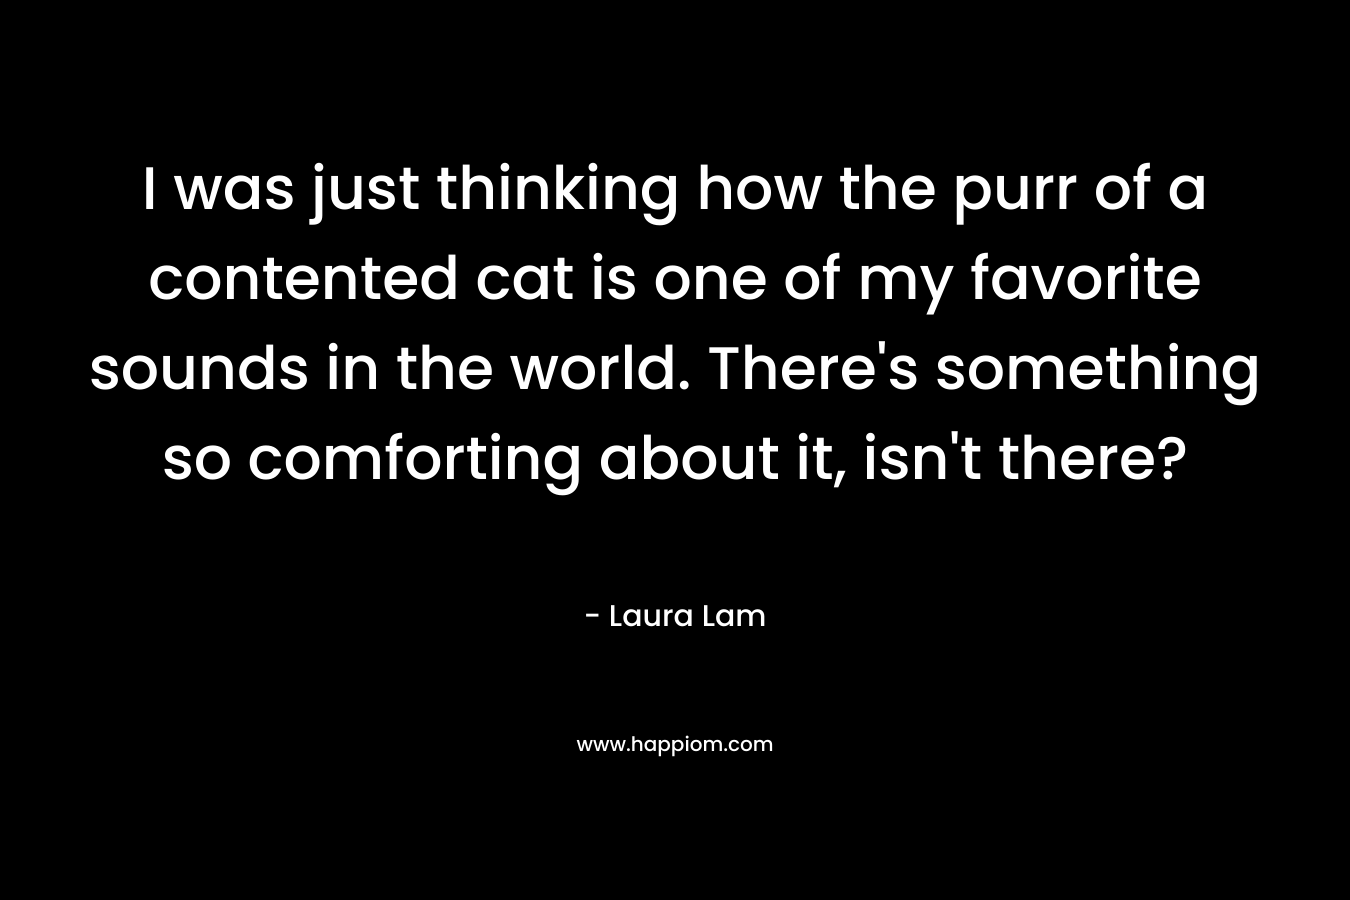 I was just thinking how the purr of a contented cat is one of my favorite sounds in the world. There’s something so comforting about it, isn’t there? – Laura Lam